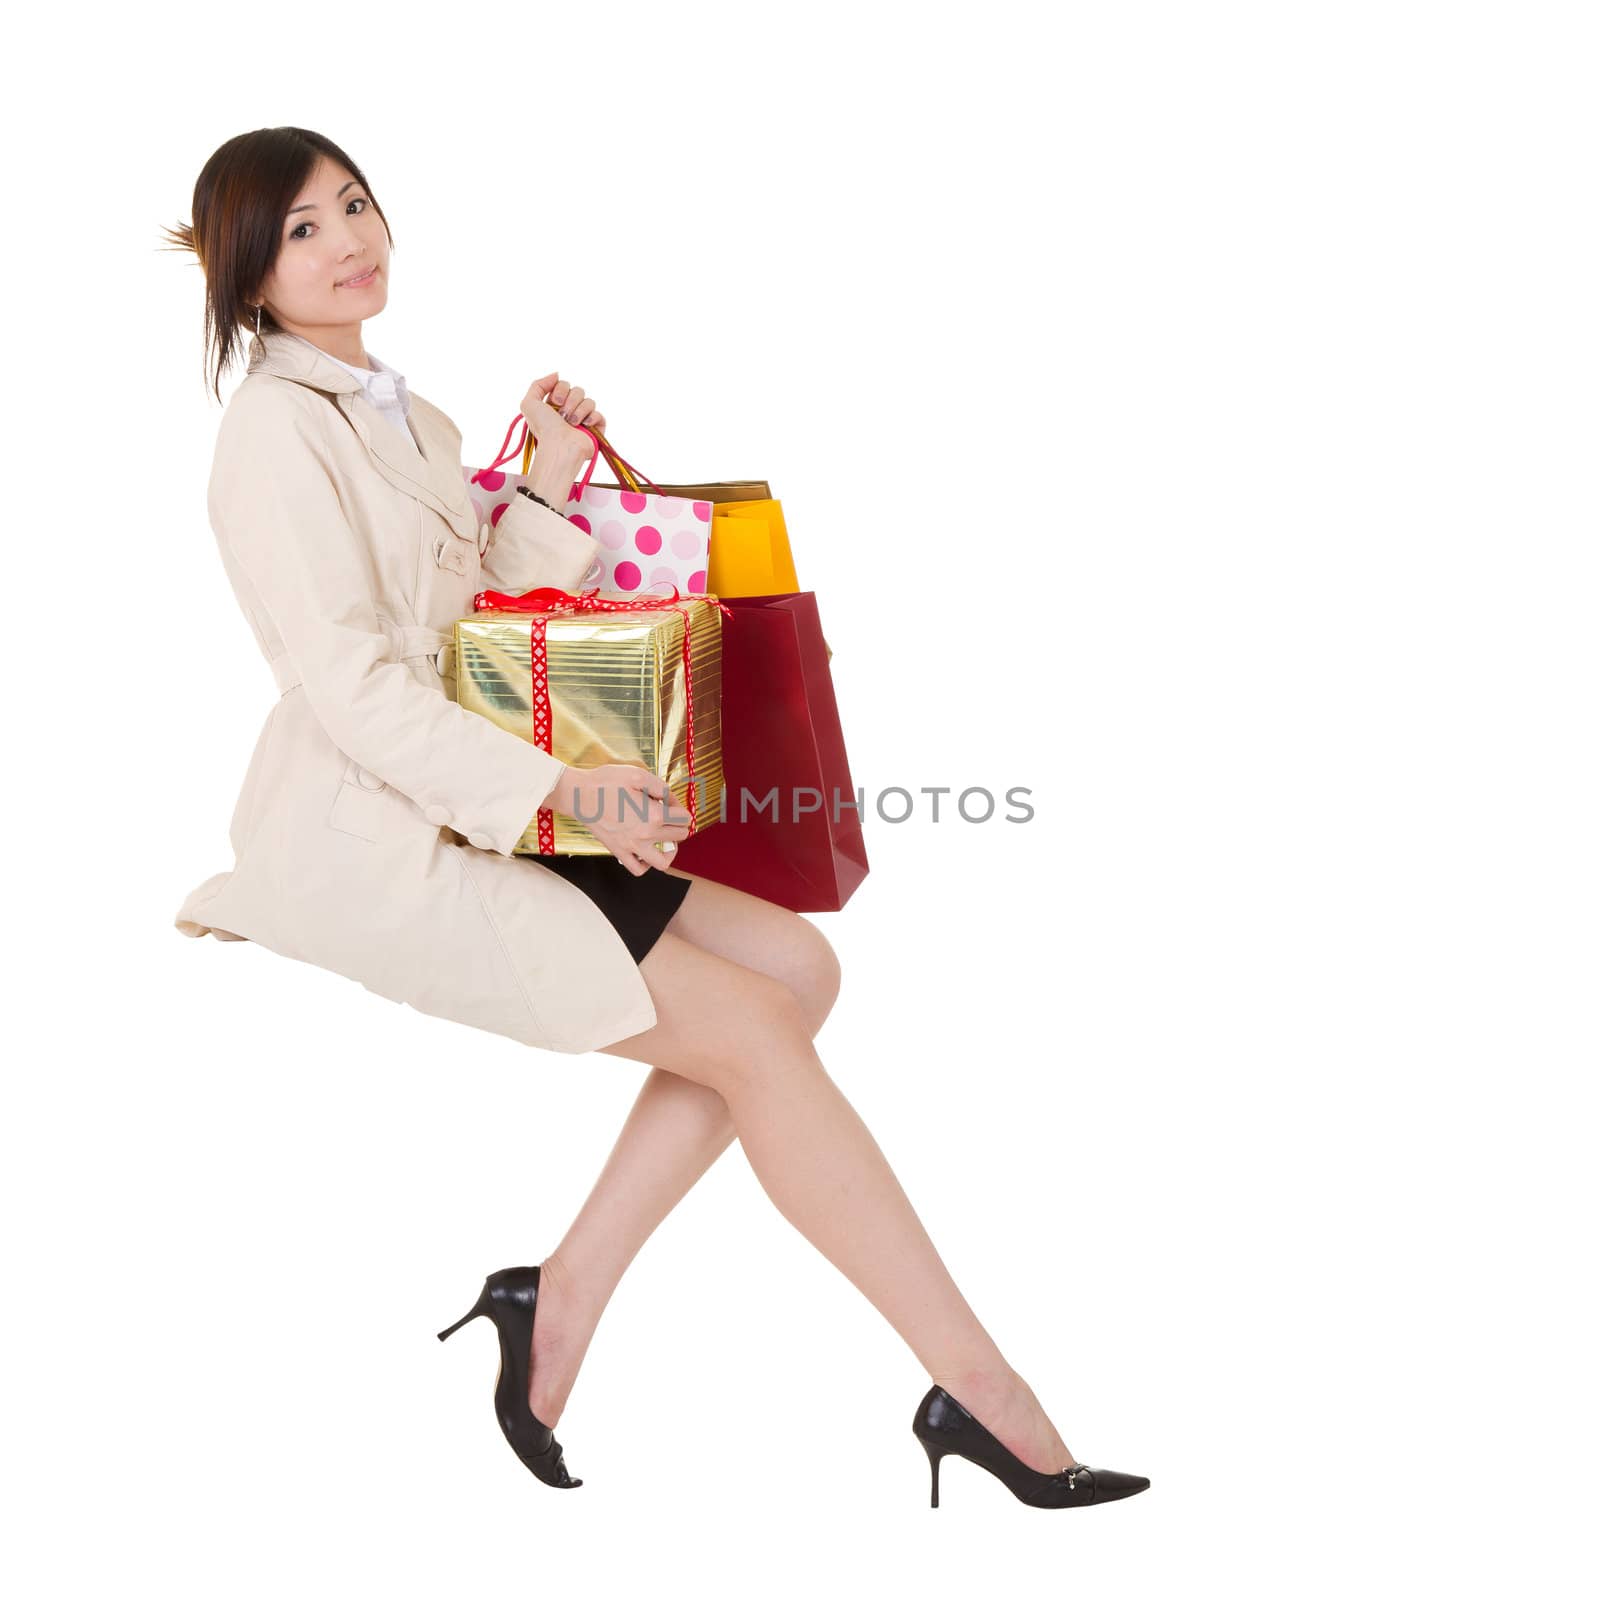 Isolated sitting shopping woman holding bags and gift box, full length portrait on white background.